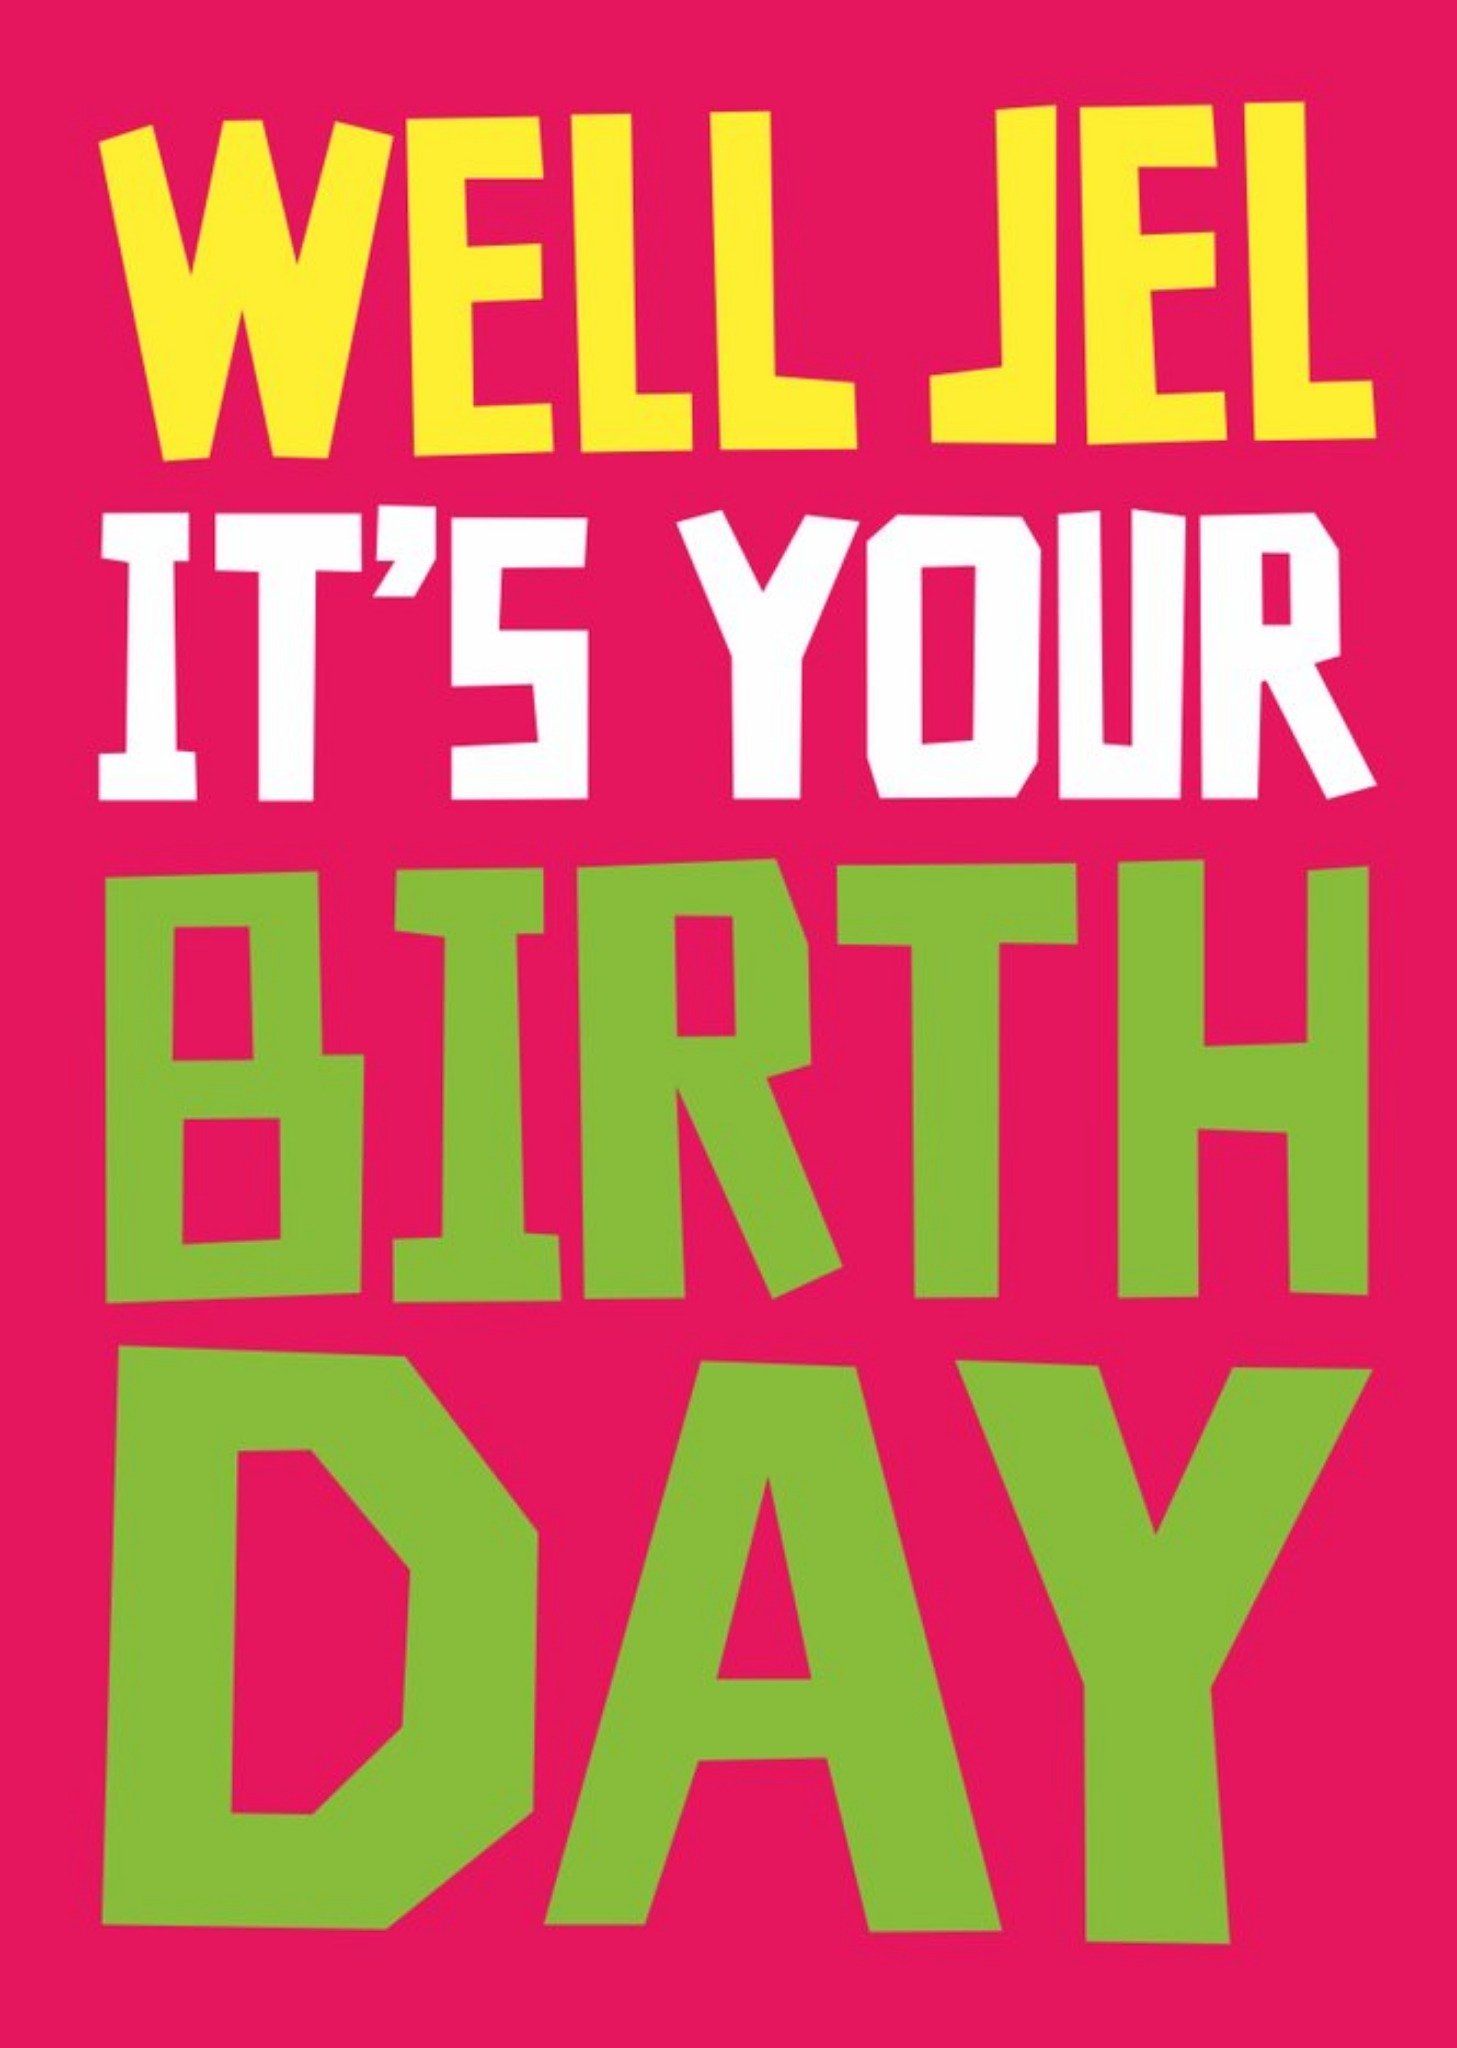 Moonpig Typographic Funny Well Jel Its Your Birthday Card Ecard